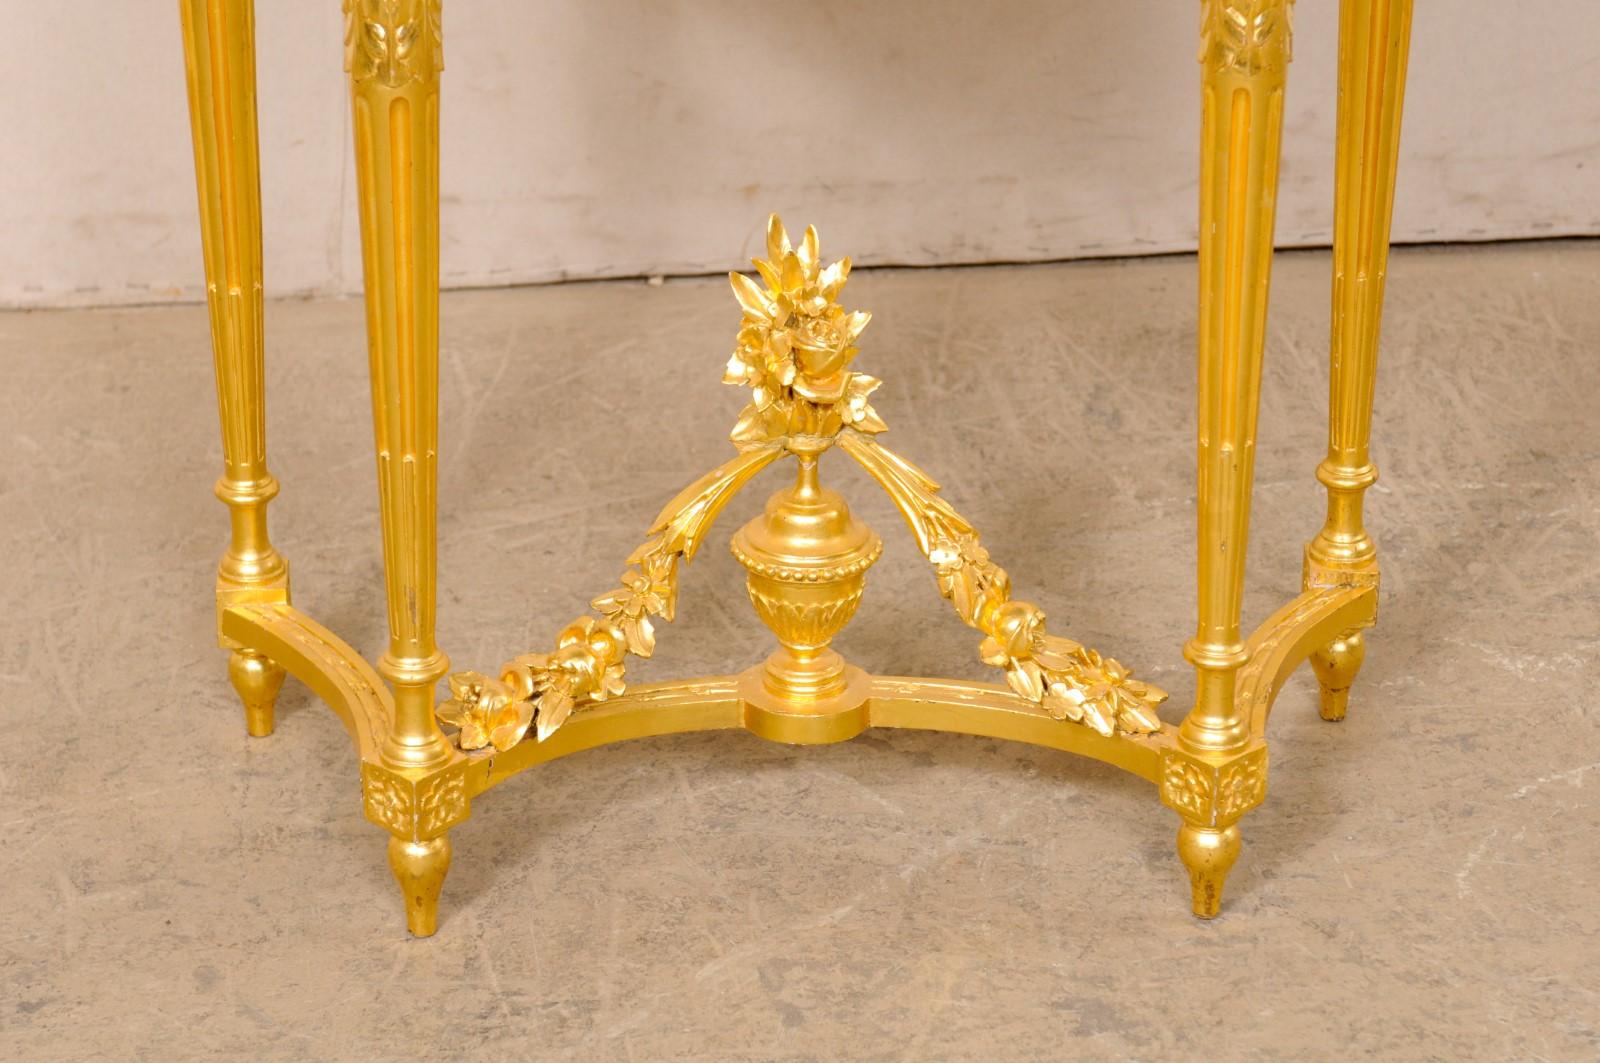 19th Century French Neoclassical Petite-Sized Carved & Gilt Wood Console W/Marble Top For Sale